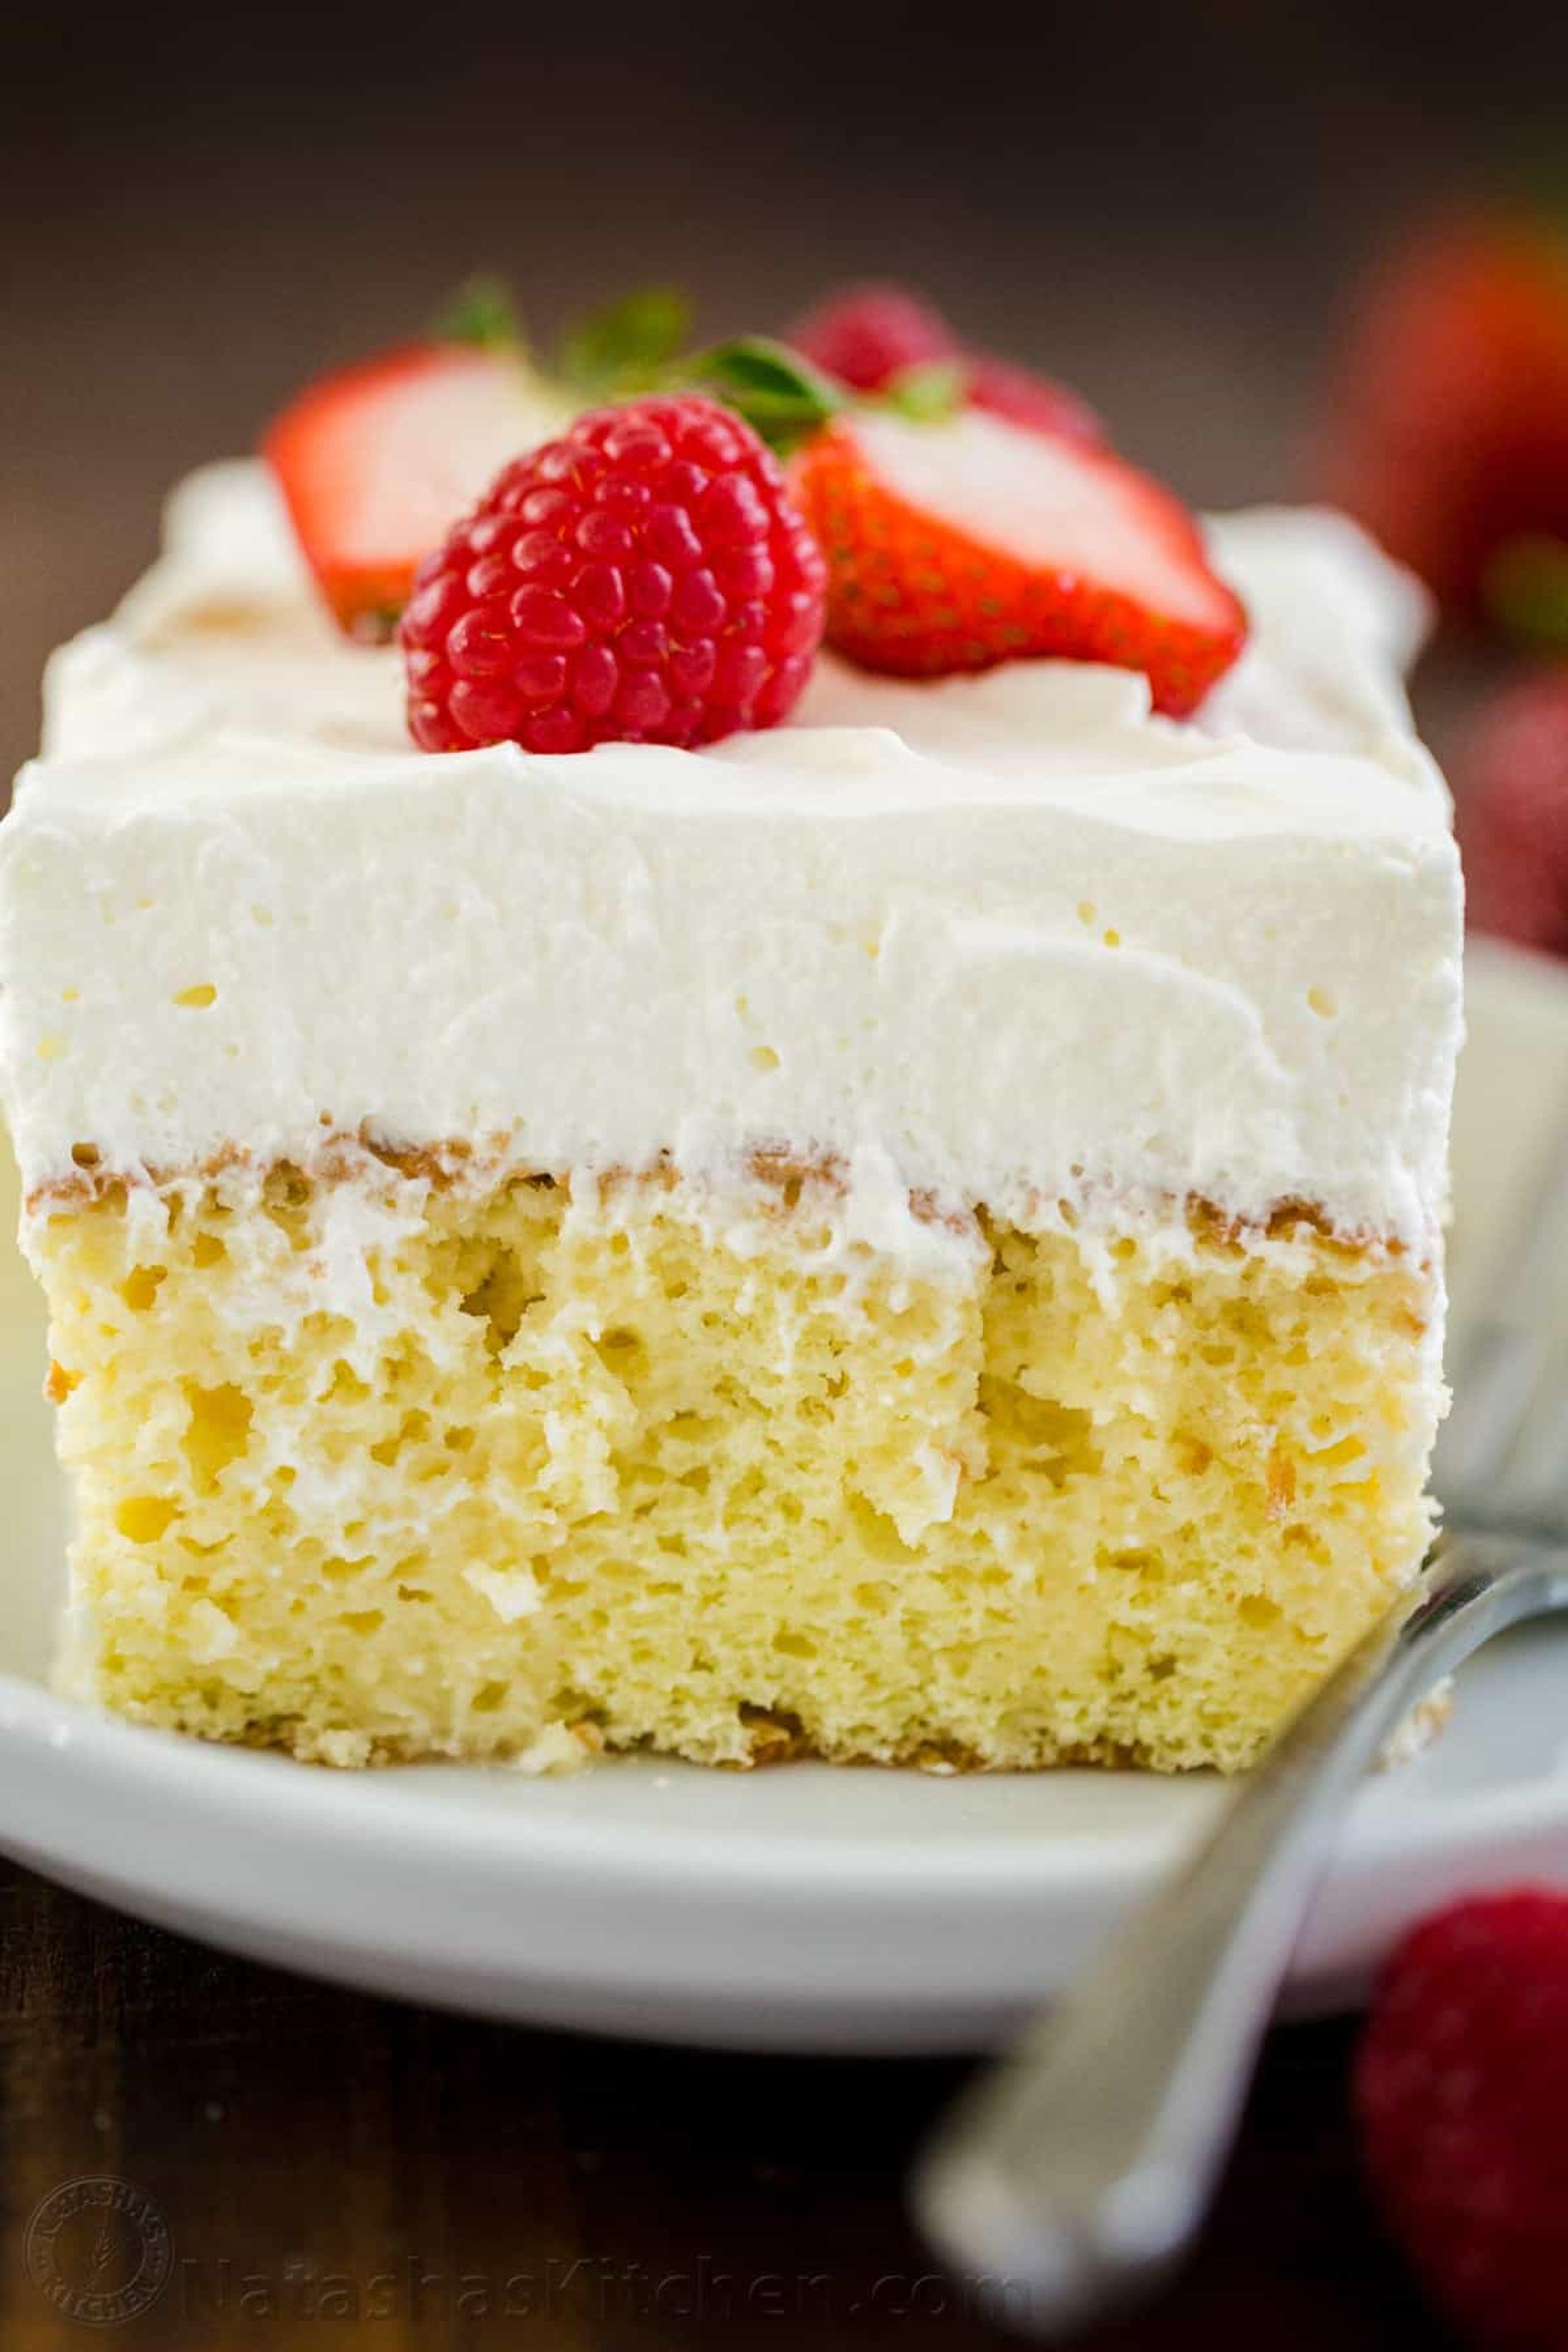 tres leches cake - Google Search